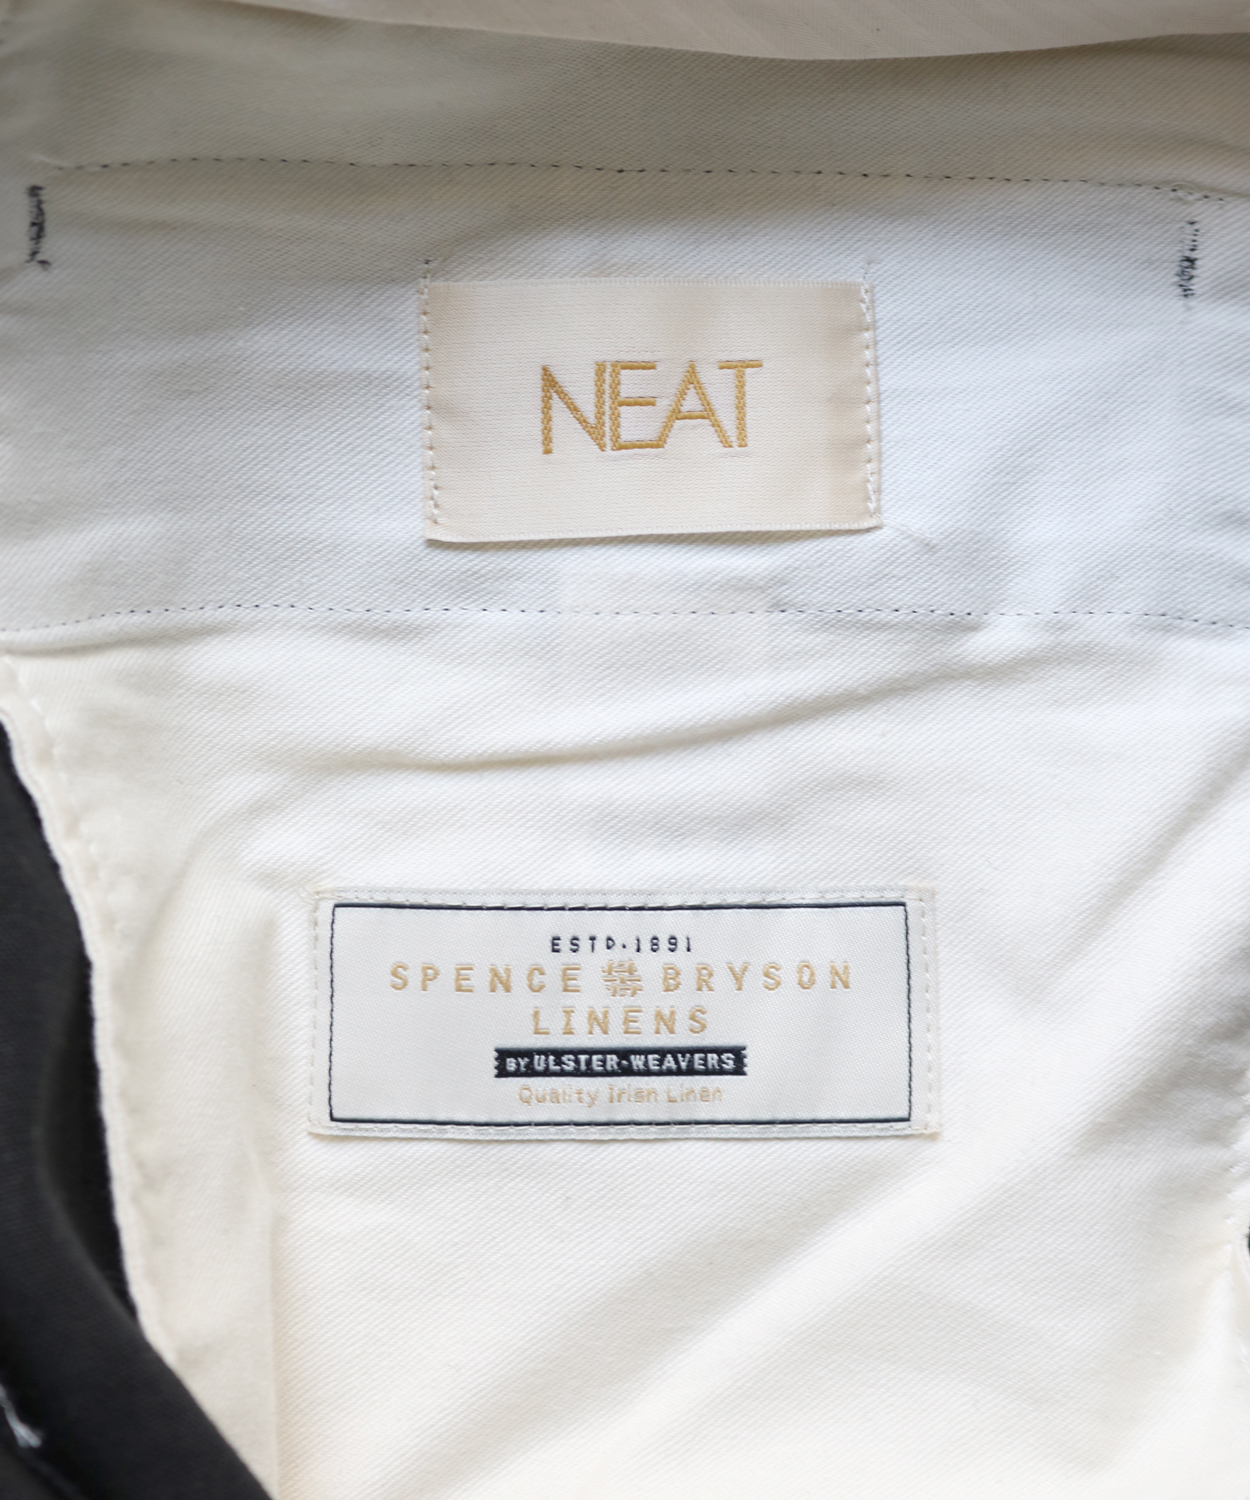 NEAT｜SPENCE BRYSON LINEN｜TAPERED - Black｜PRODUCT｜Continuer Inc 